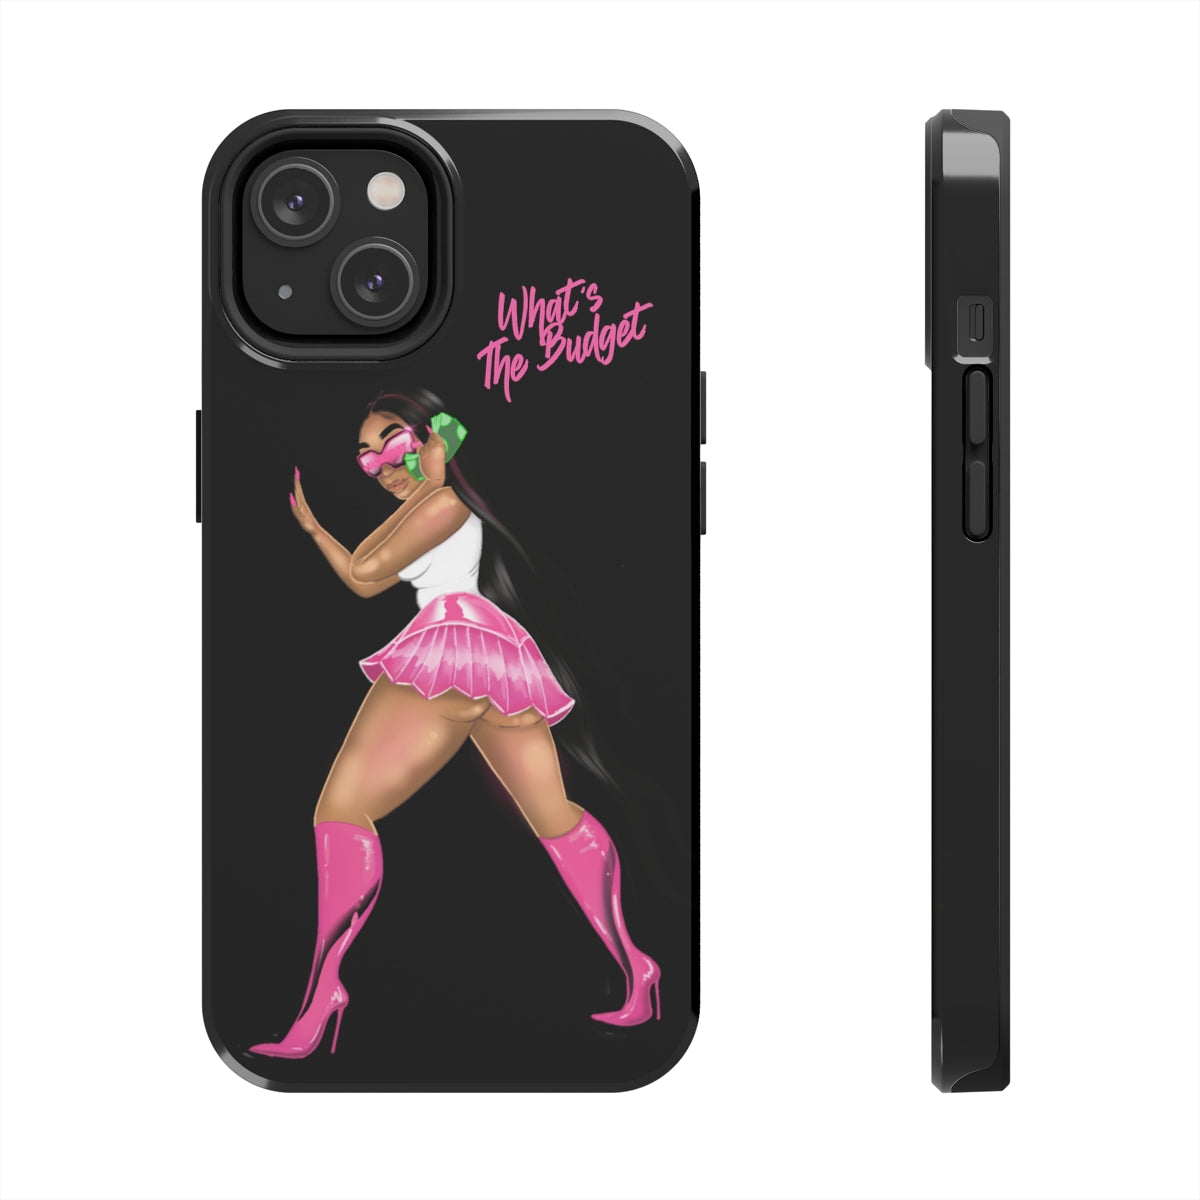 WHATS THE BUDGET? Phone Case